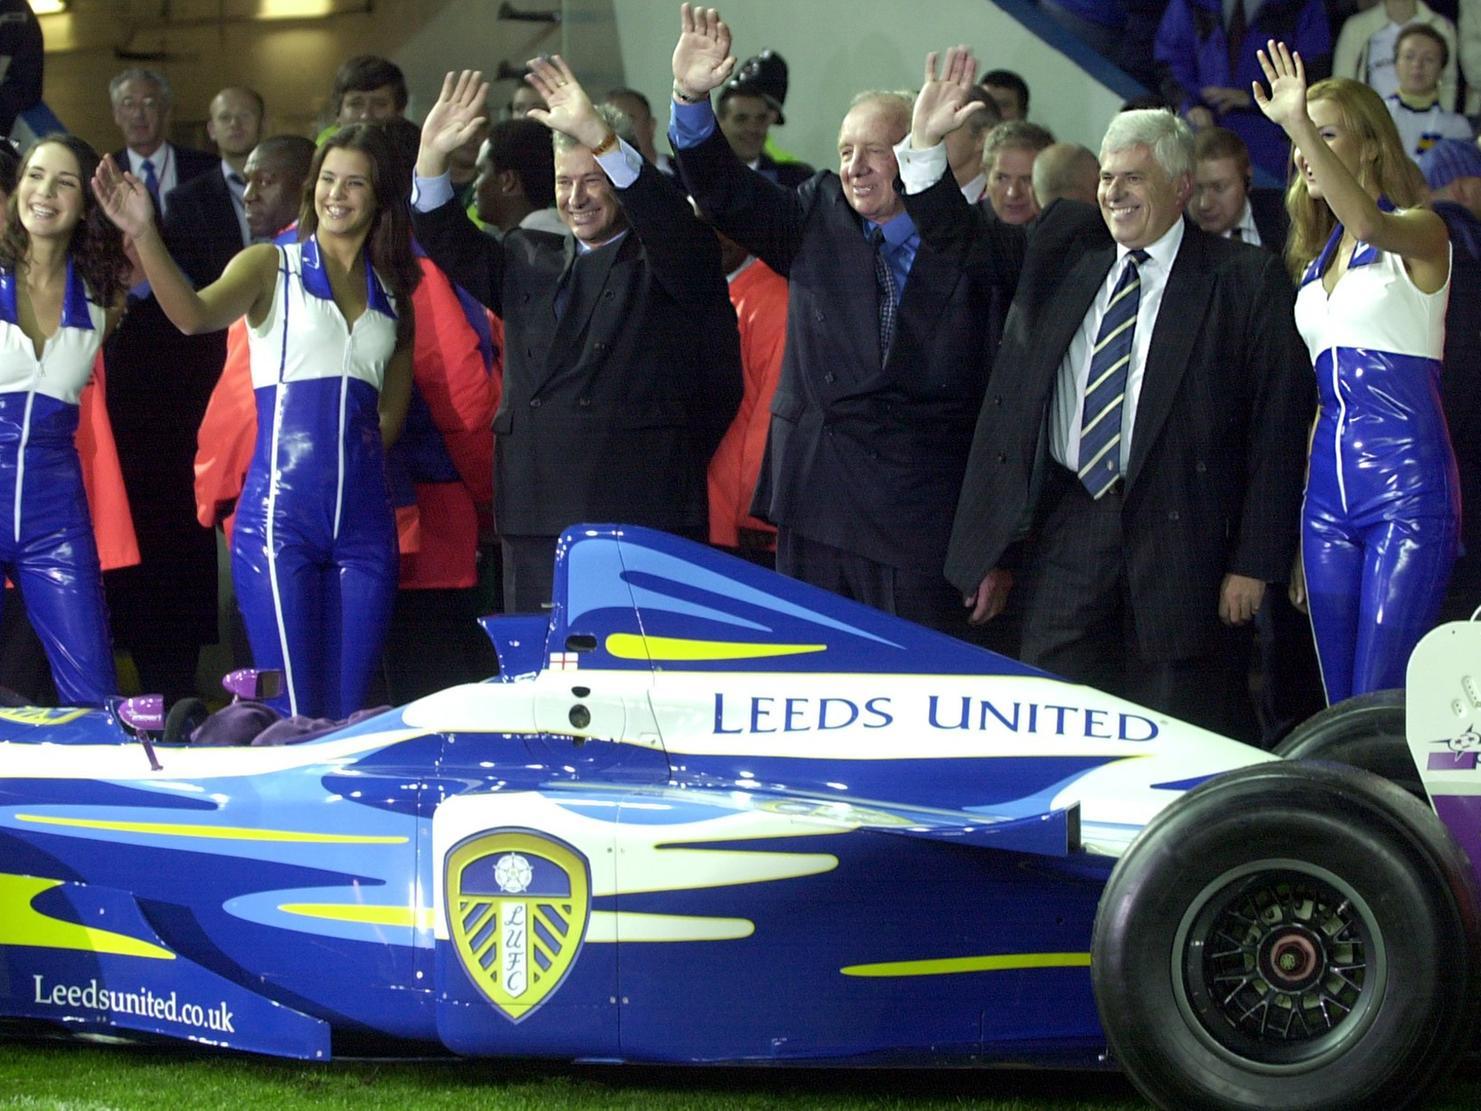 The Leeds United racing car was unveiled. On the pitch it was a high powered performance from the Whites with goals from Robbie Keane, Harry Kewell and Eirik Bakke.